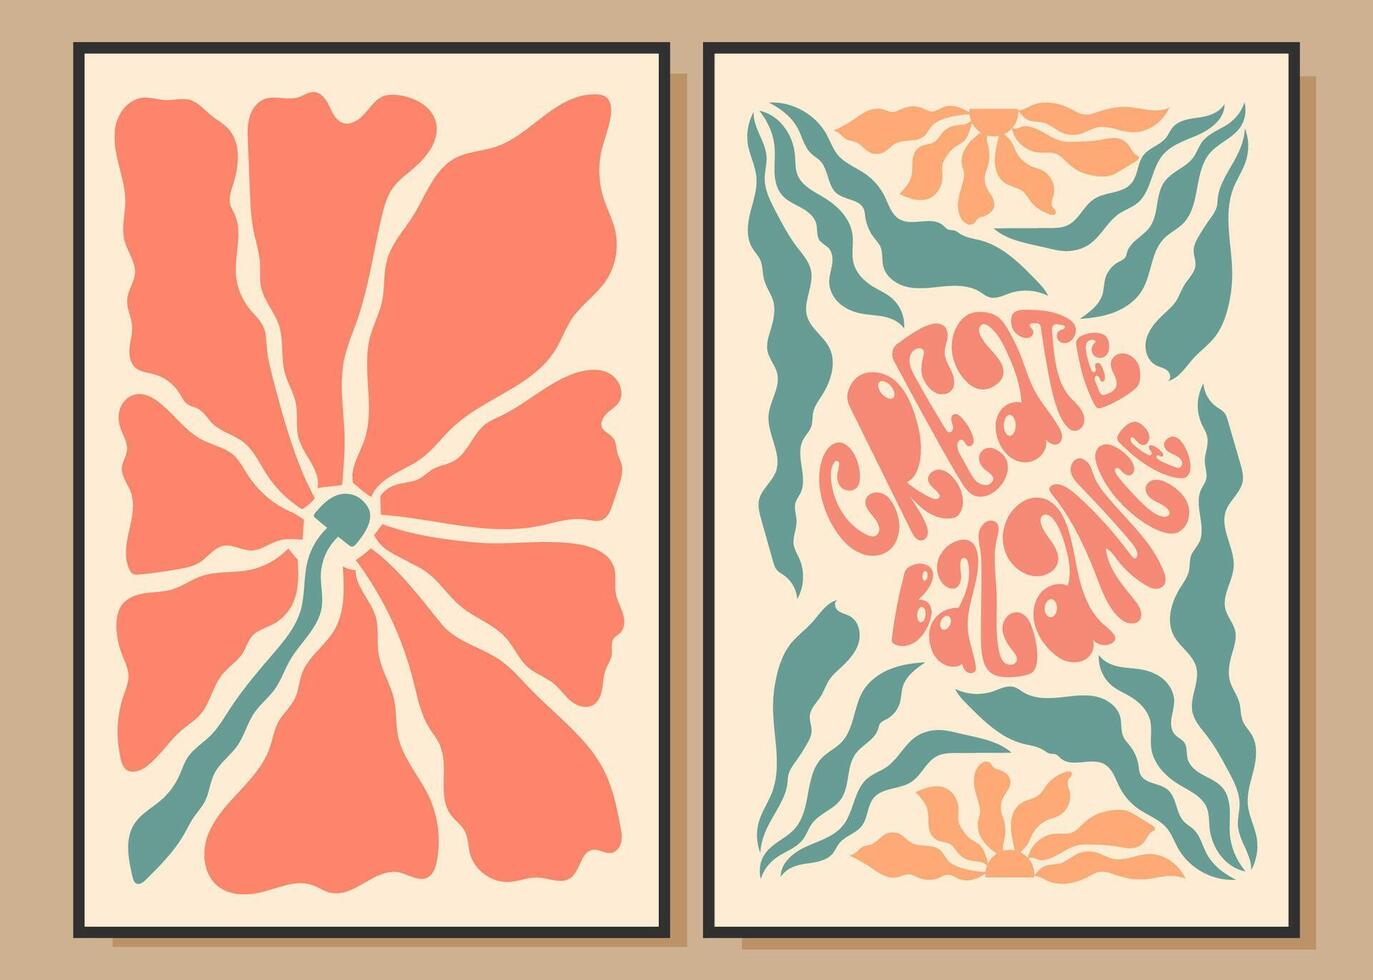 Hand drawn delicate motivational posters. Create balance. Vector floral design in minimalistic style.